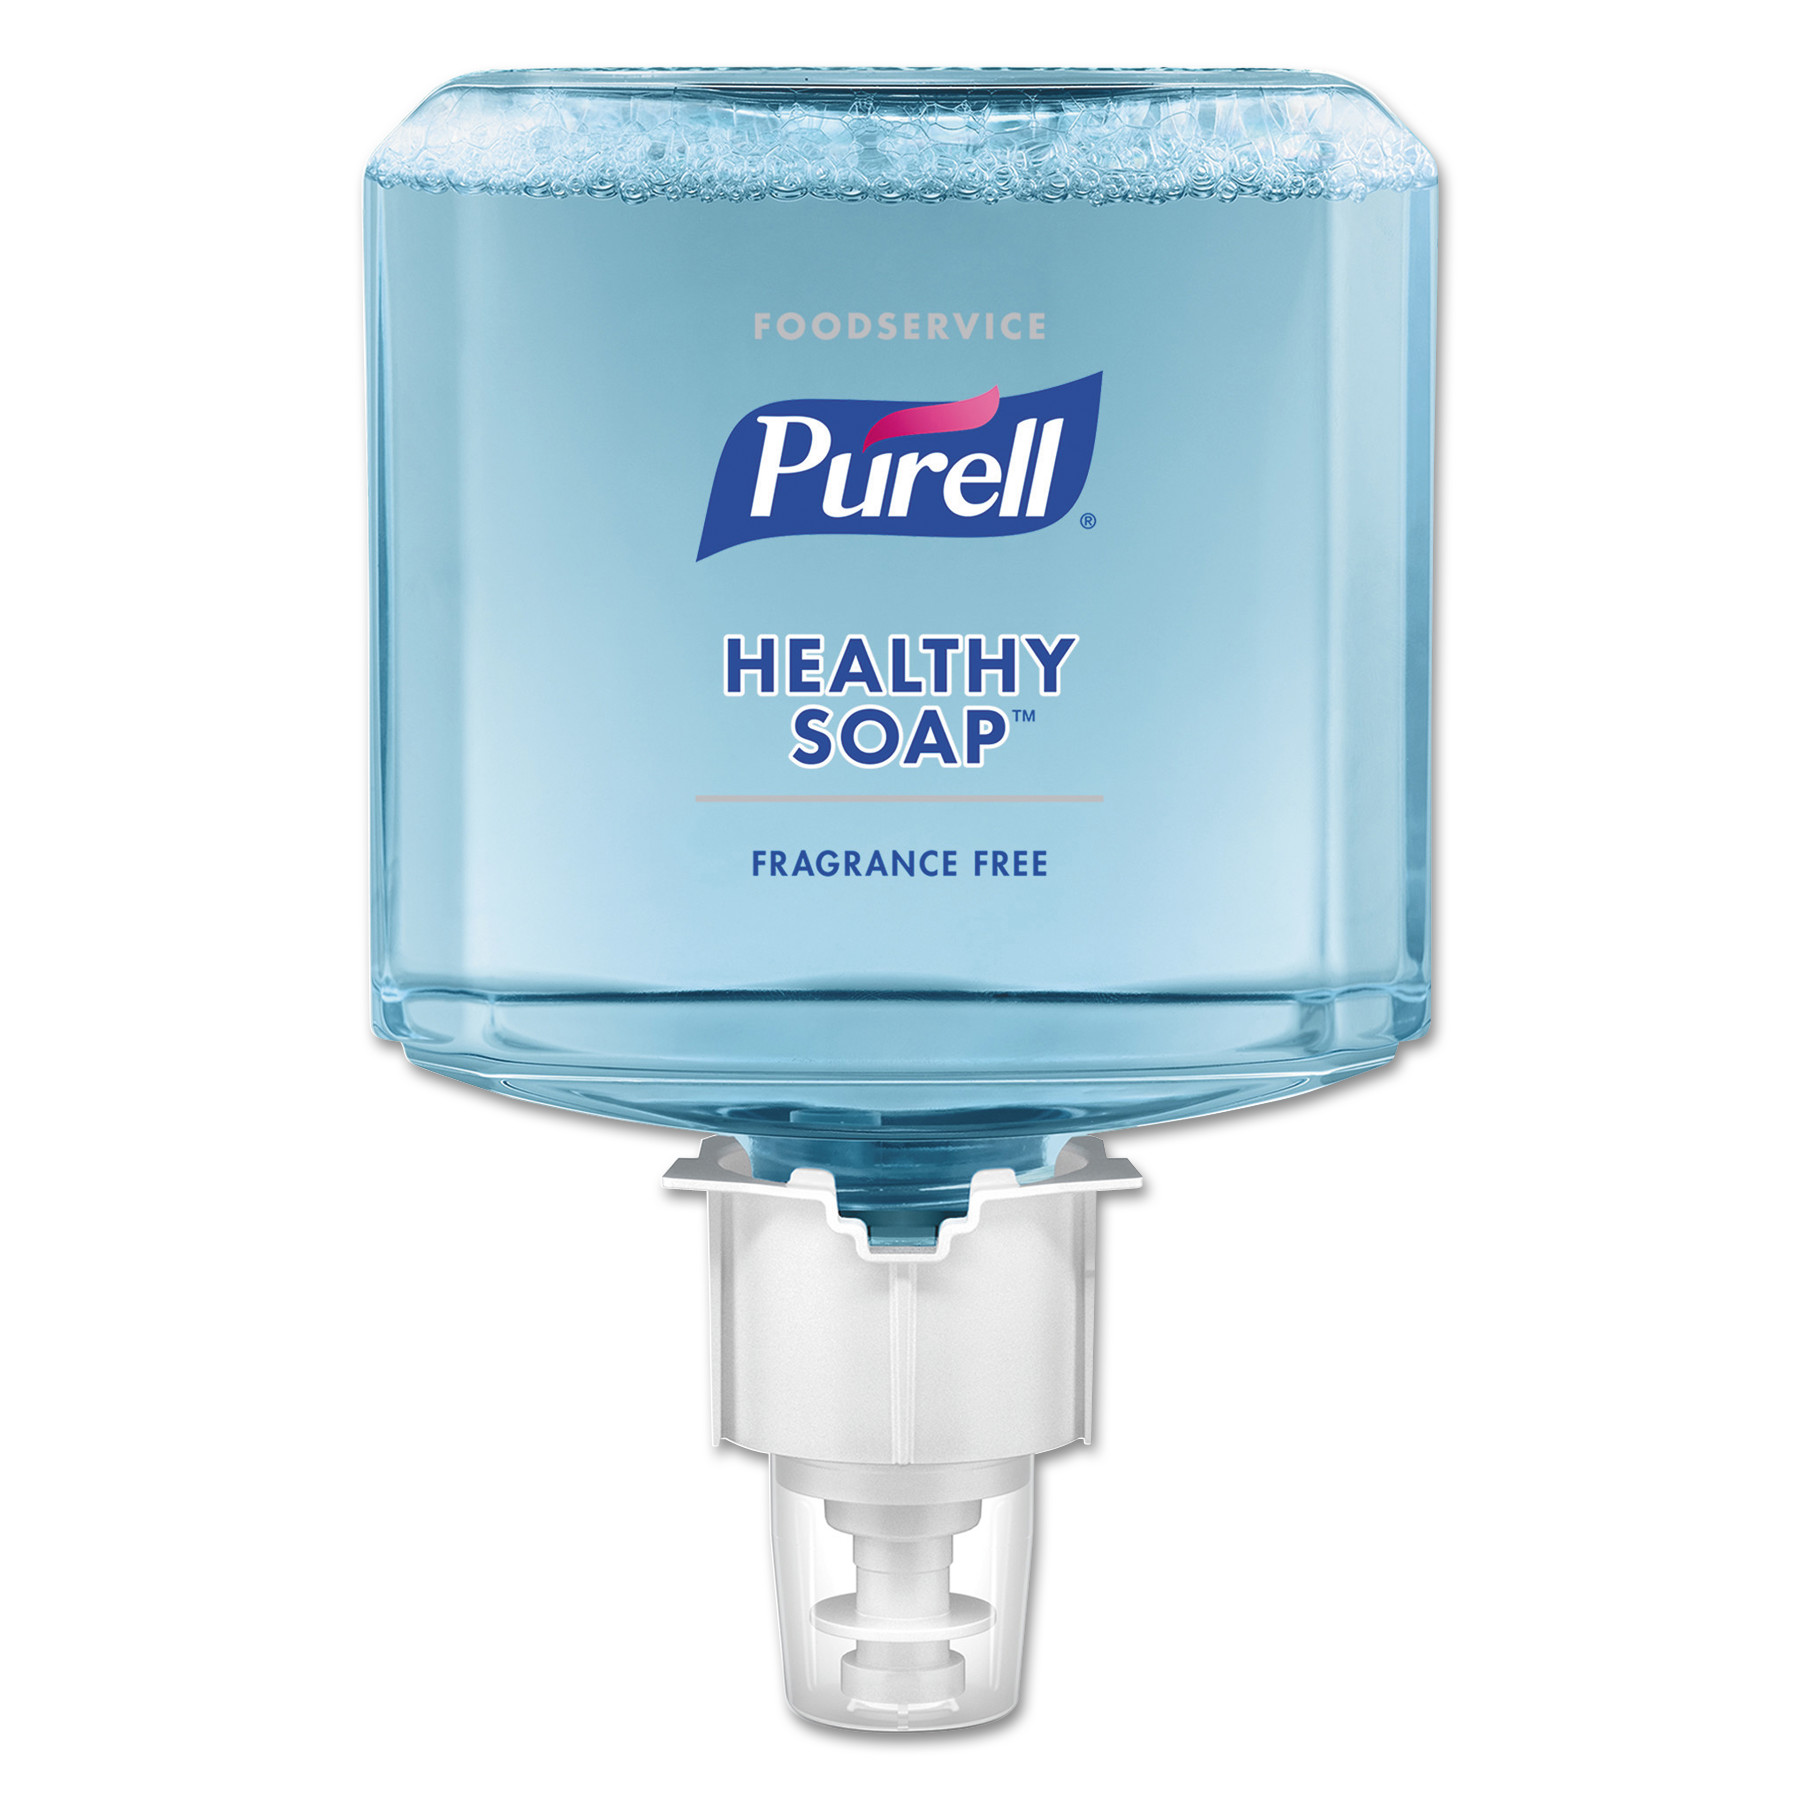  PURELL 6473-02 Foodservice HEALTHY SOAP Fragrance-Free Foam, 1200 mL, For ES6 Dispensers, 2/CT (GOJ647302) 